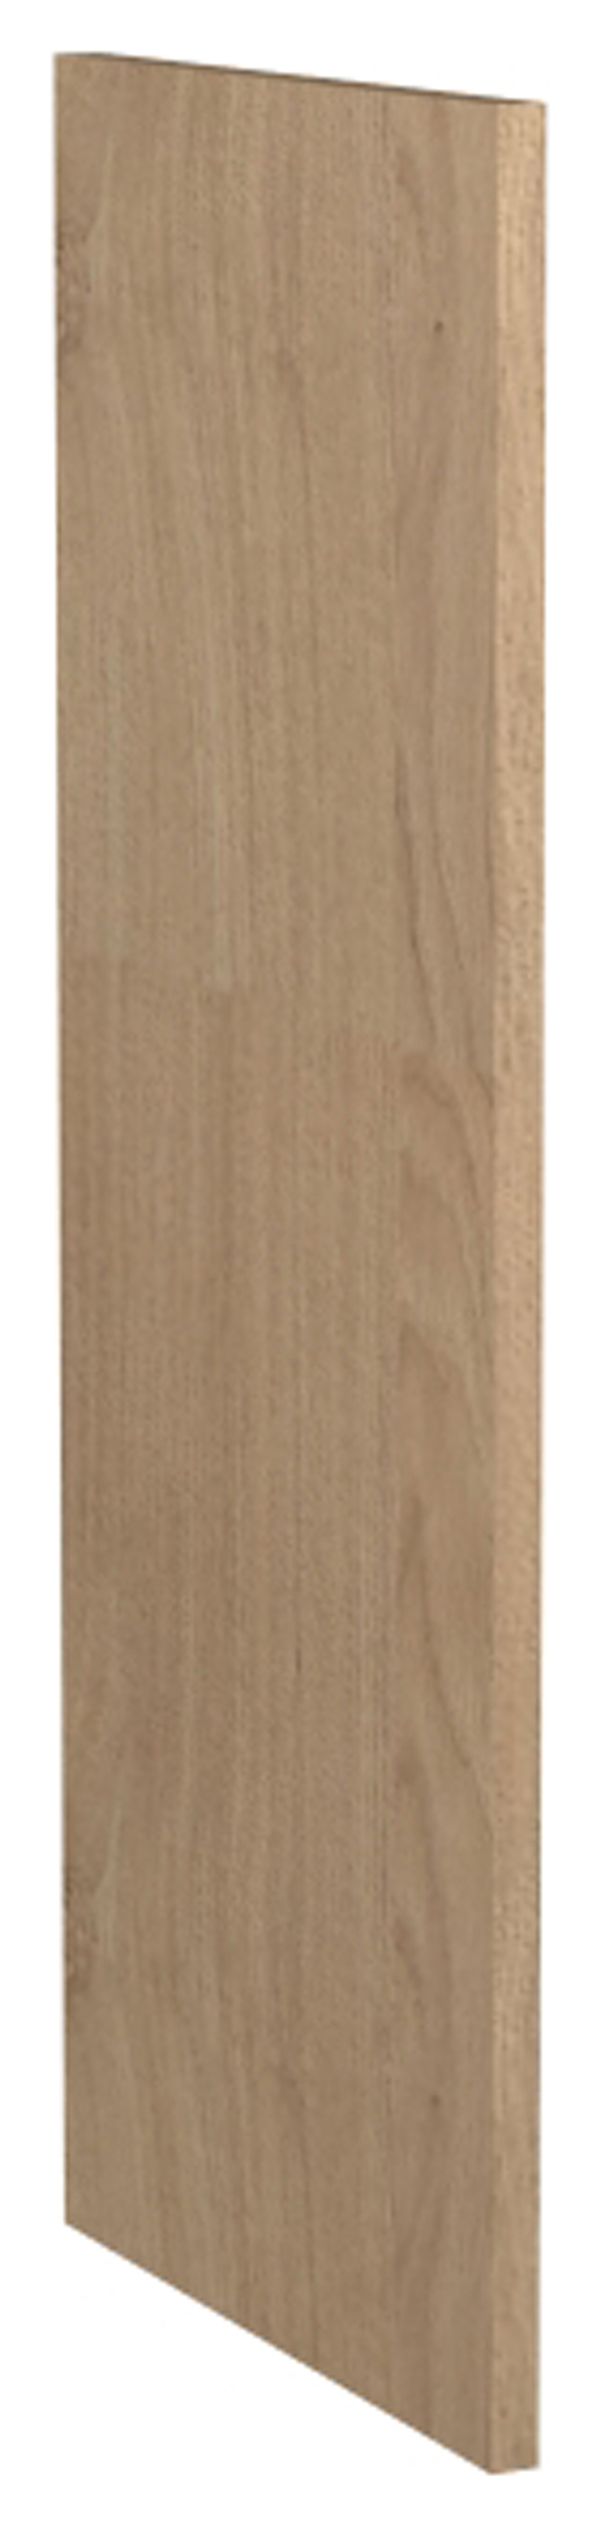 Image of Wickes Vienna Oak Wall Decor End Panel - 18mm